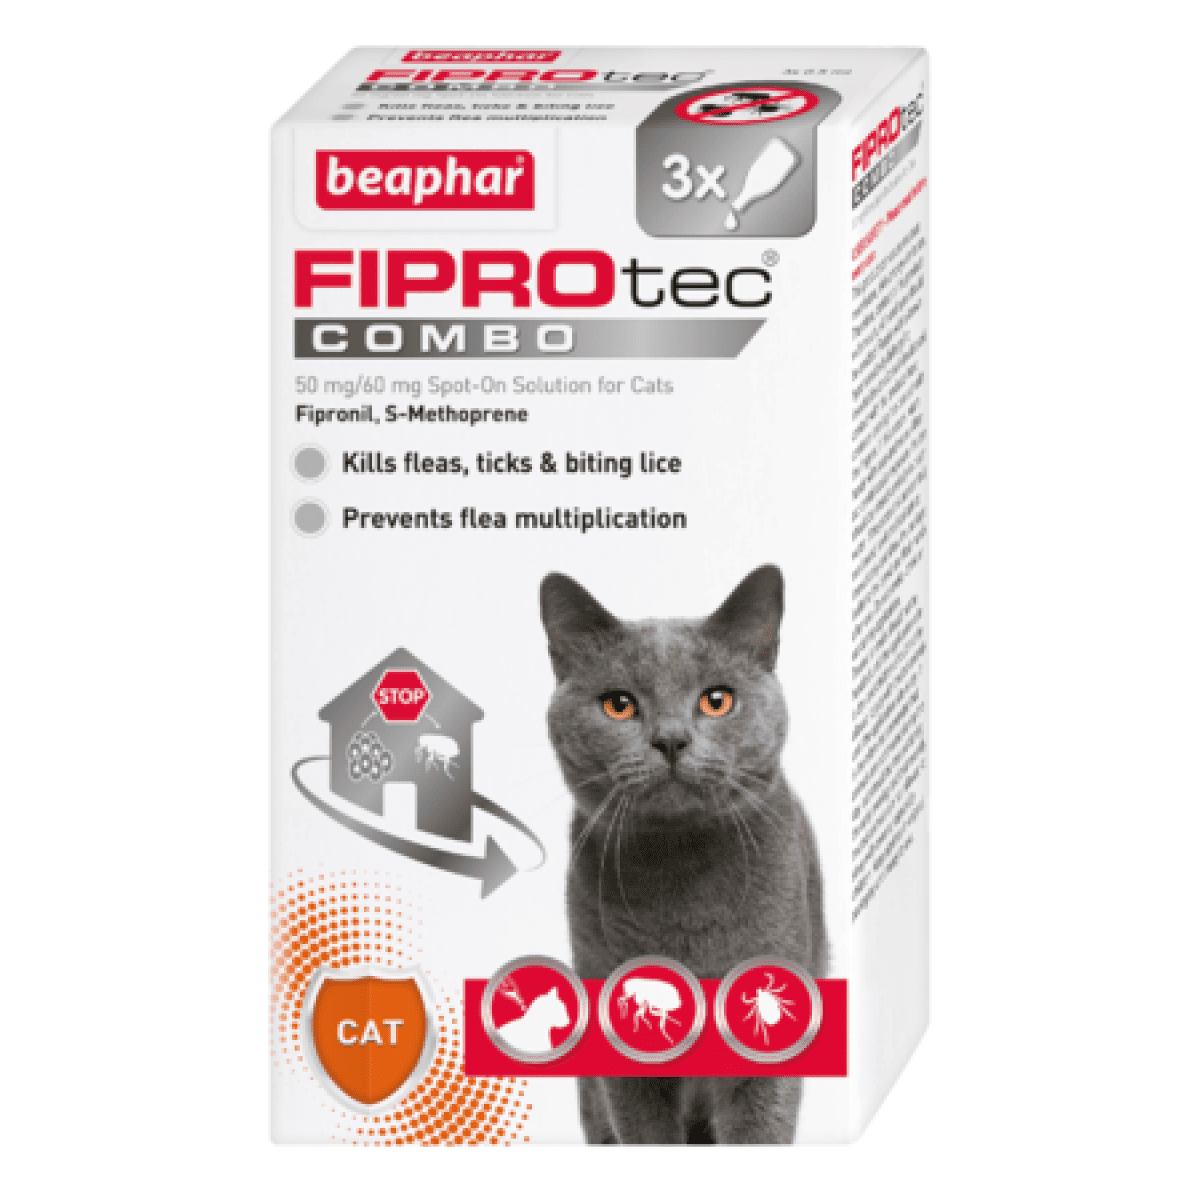 Beaphar – FIPROtec Combo Cats x 3 – Pawfect Supplies Ltd Product Image